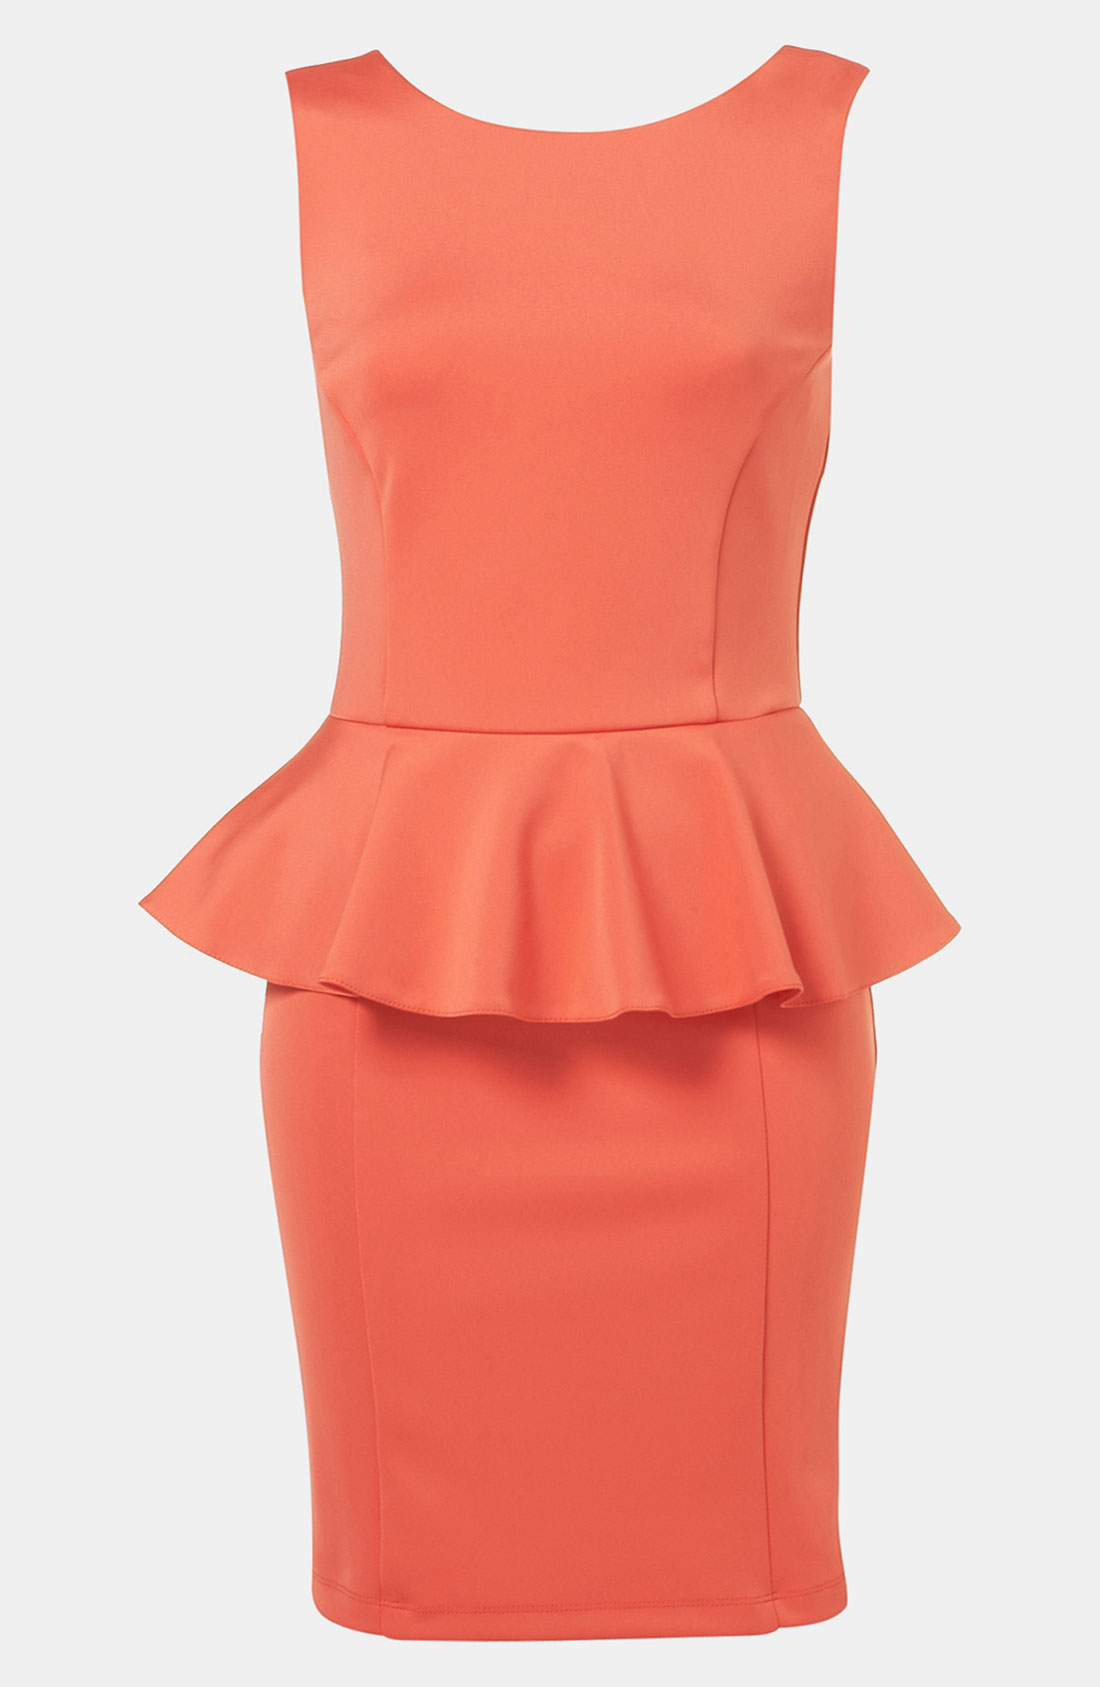 Topshop Peplum Dress in Pink (coral) | Lyst